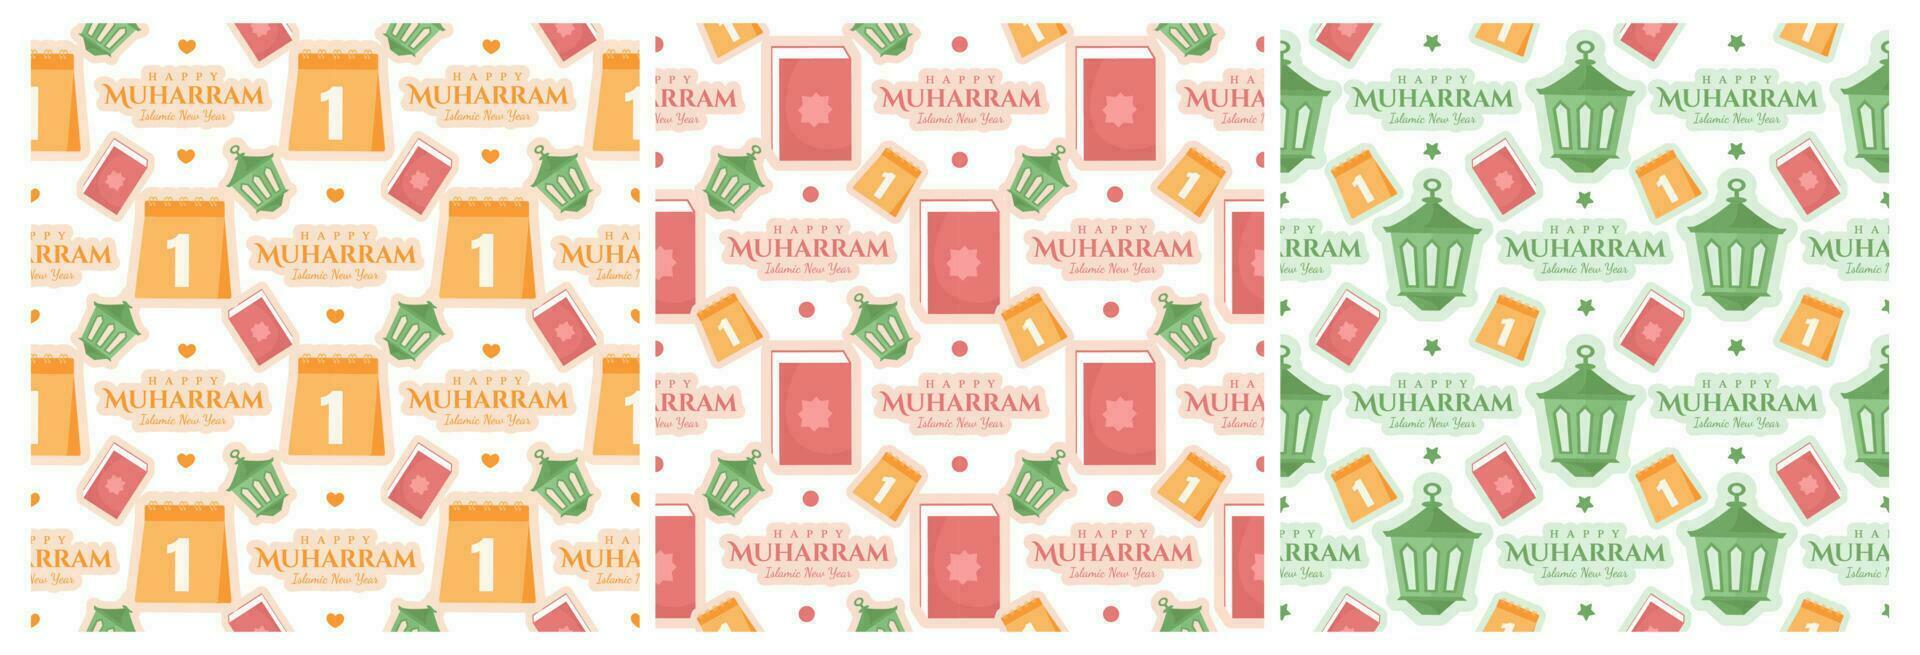 Set of Happy Islamic New Year Seamless Pattern Design Flat Illustration with Muslims Elements in Template Hand Drawn vector